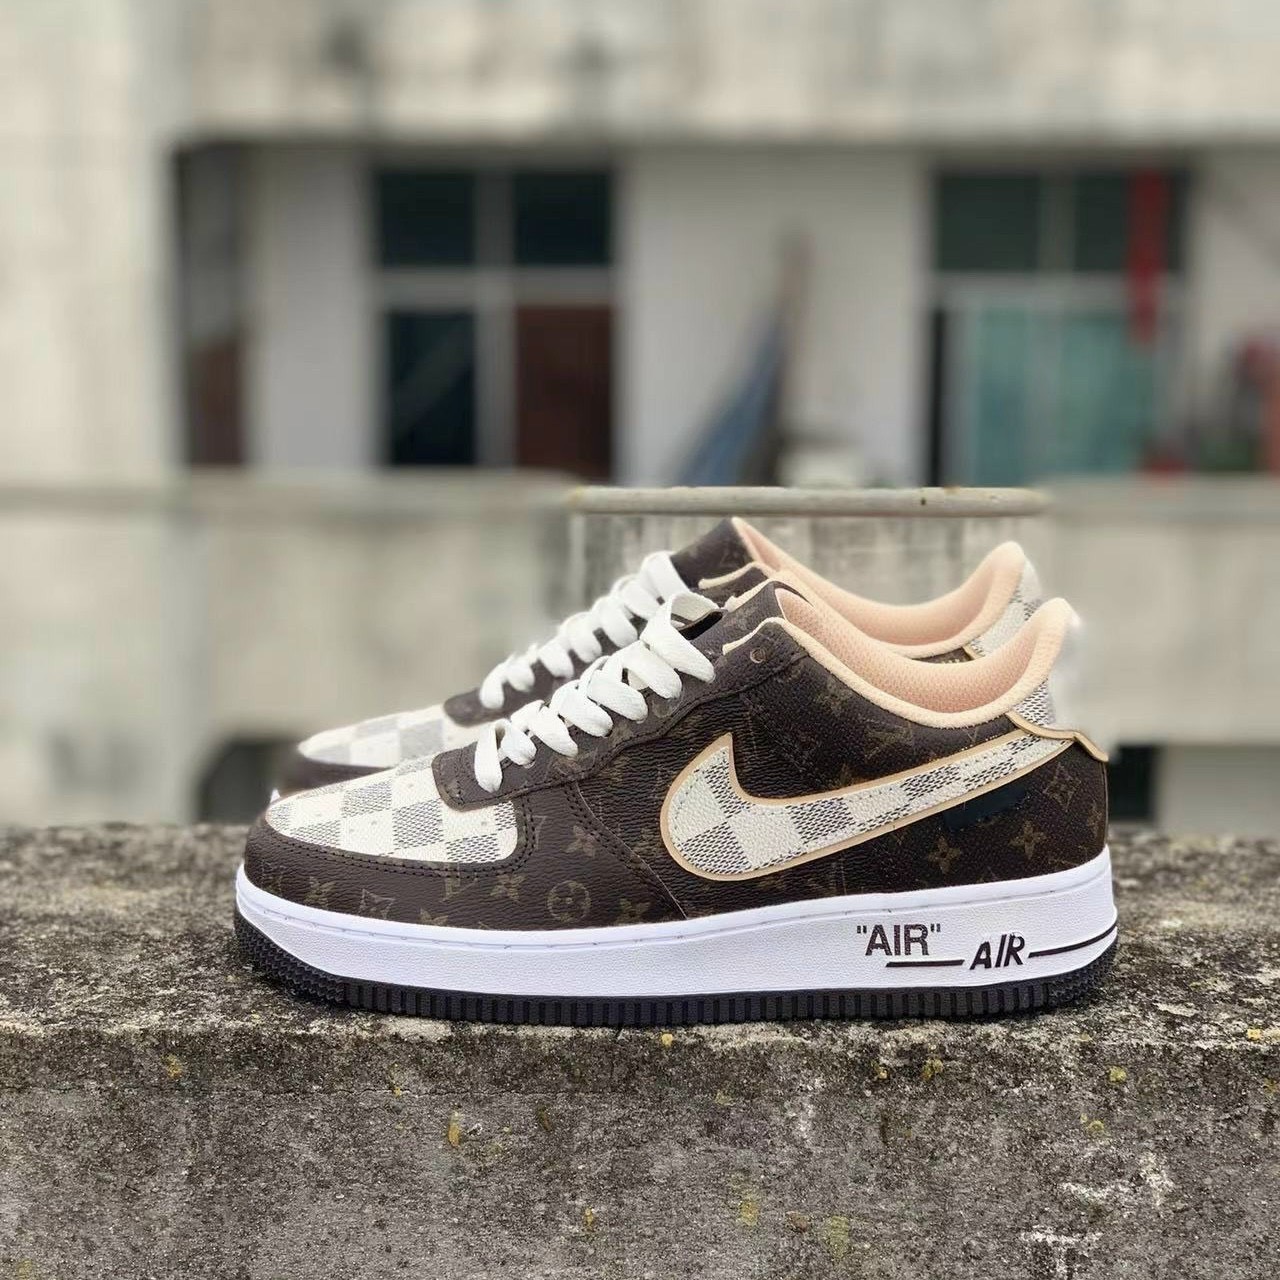 Take a Look at These Unreleased Louis Vuitton x Nike Air Force 1s  Sneaker  Freaker